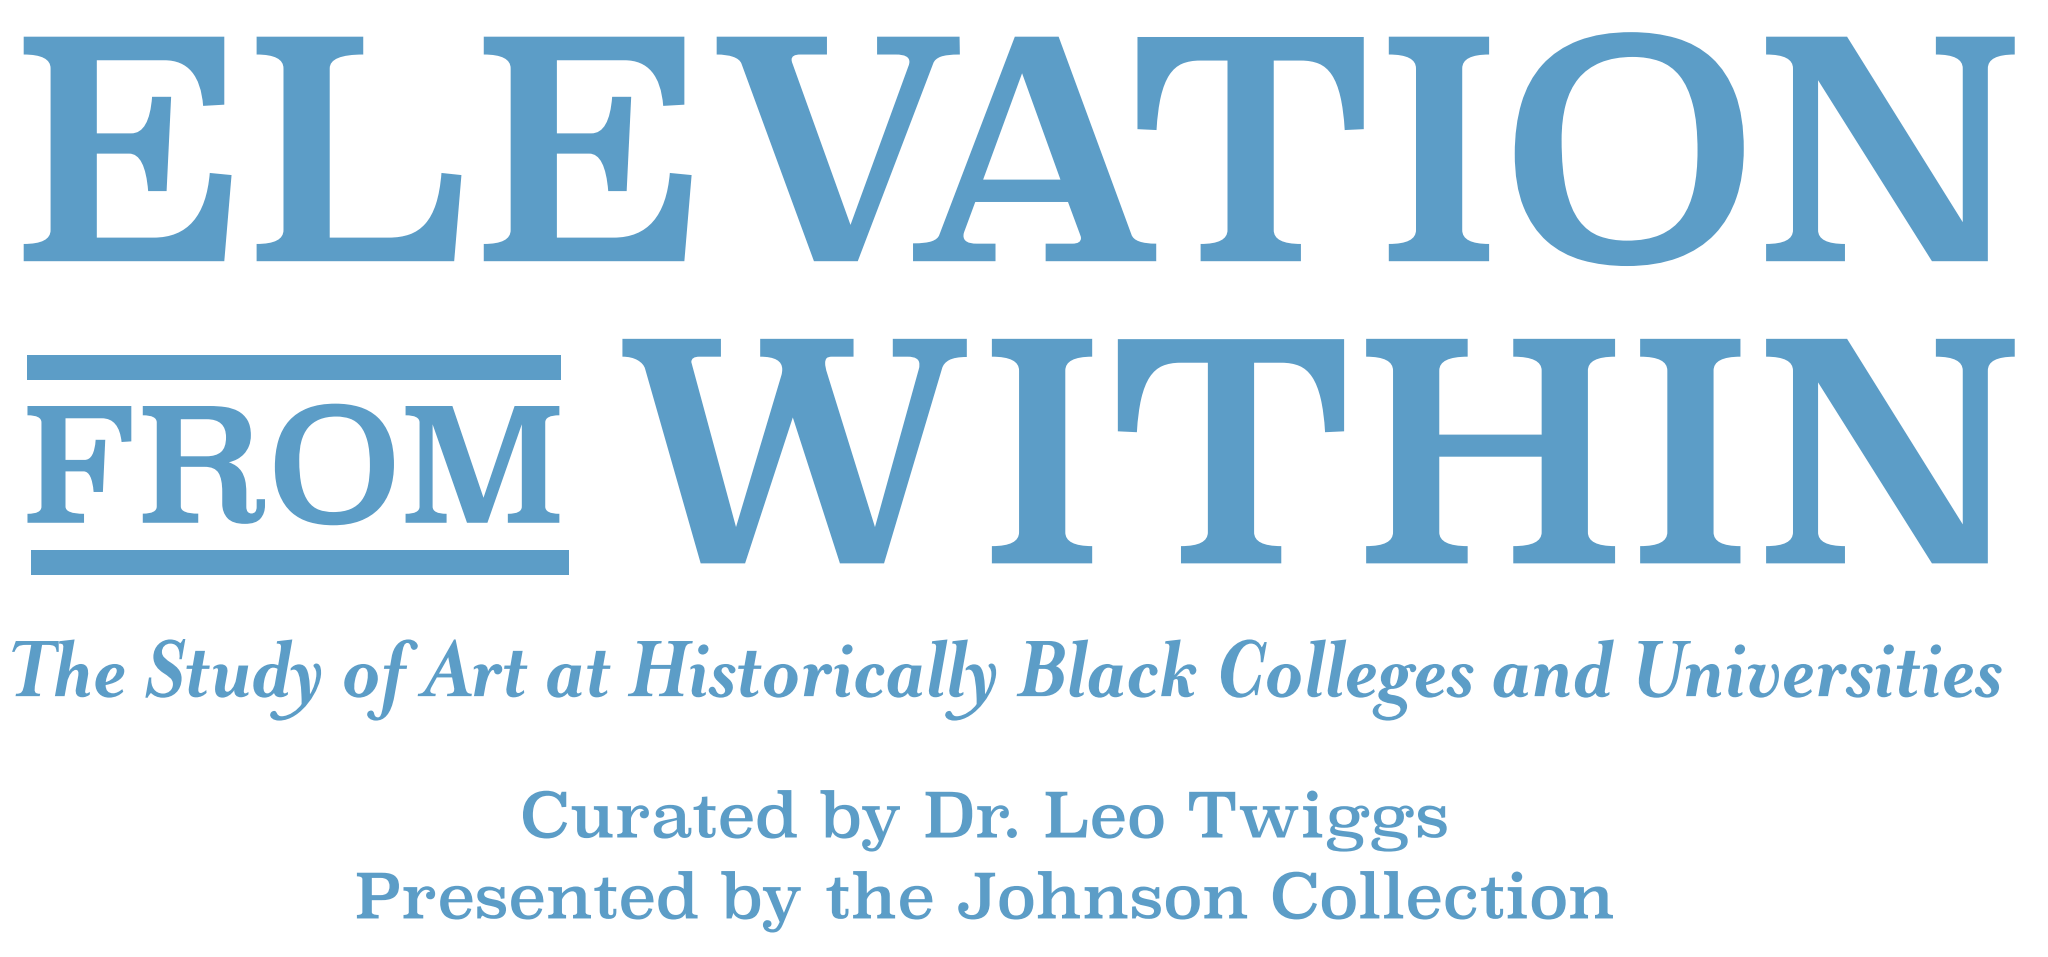 ELEVATION FROM WITHIN LOGO